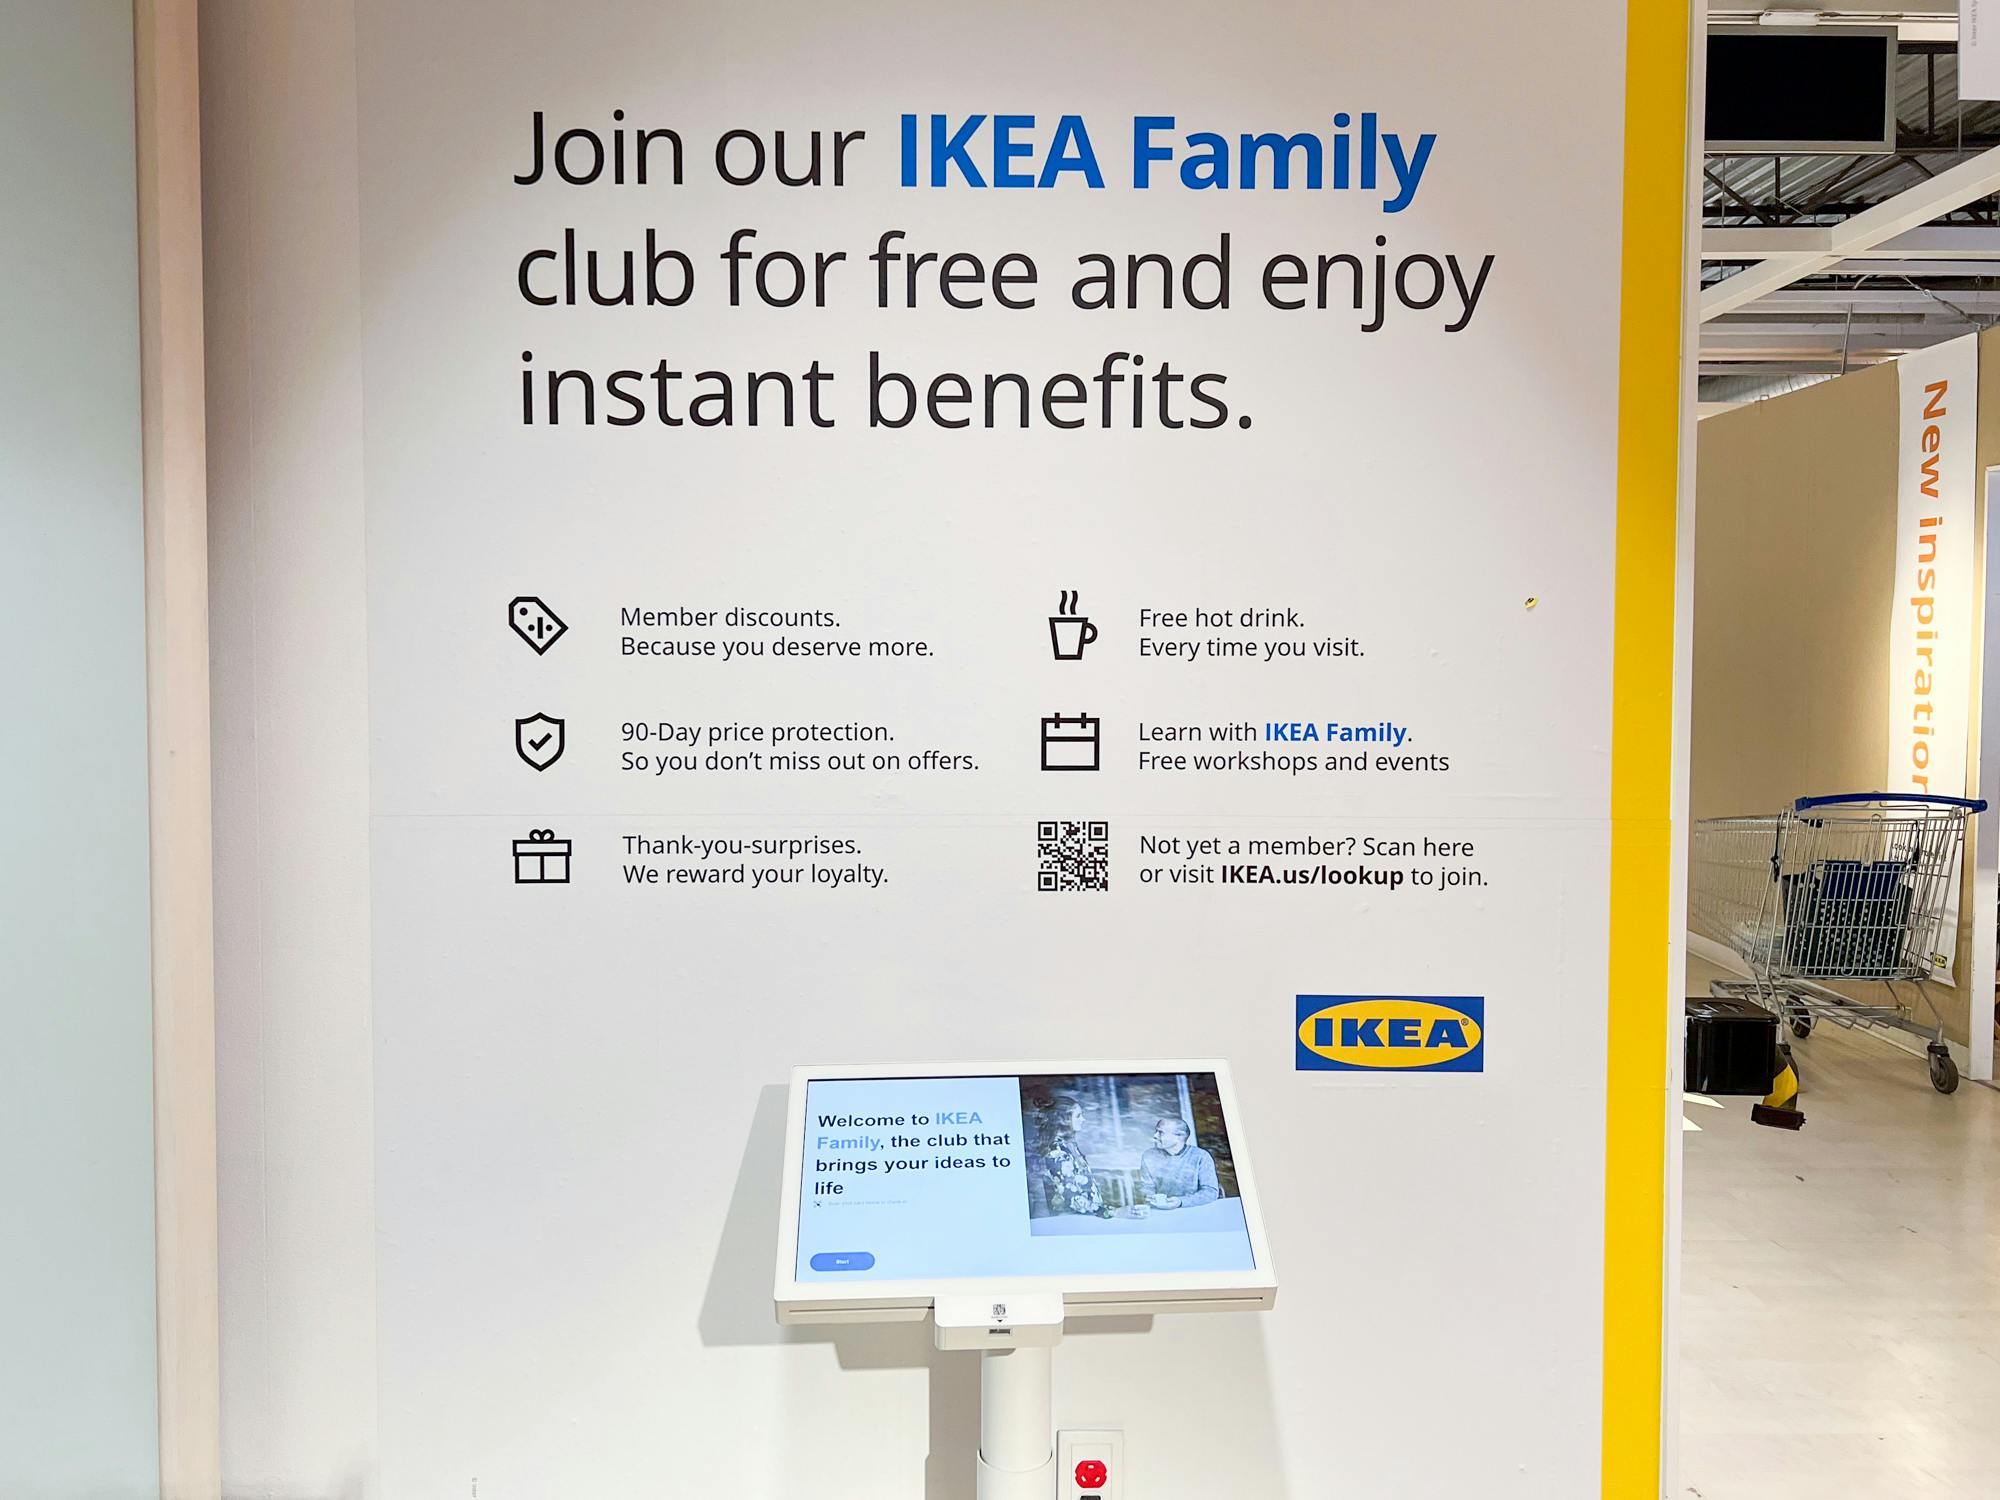 ikea store family member sign up kcl 14 1694012707 1694012707